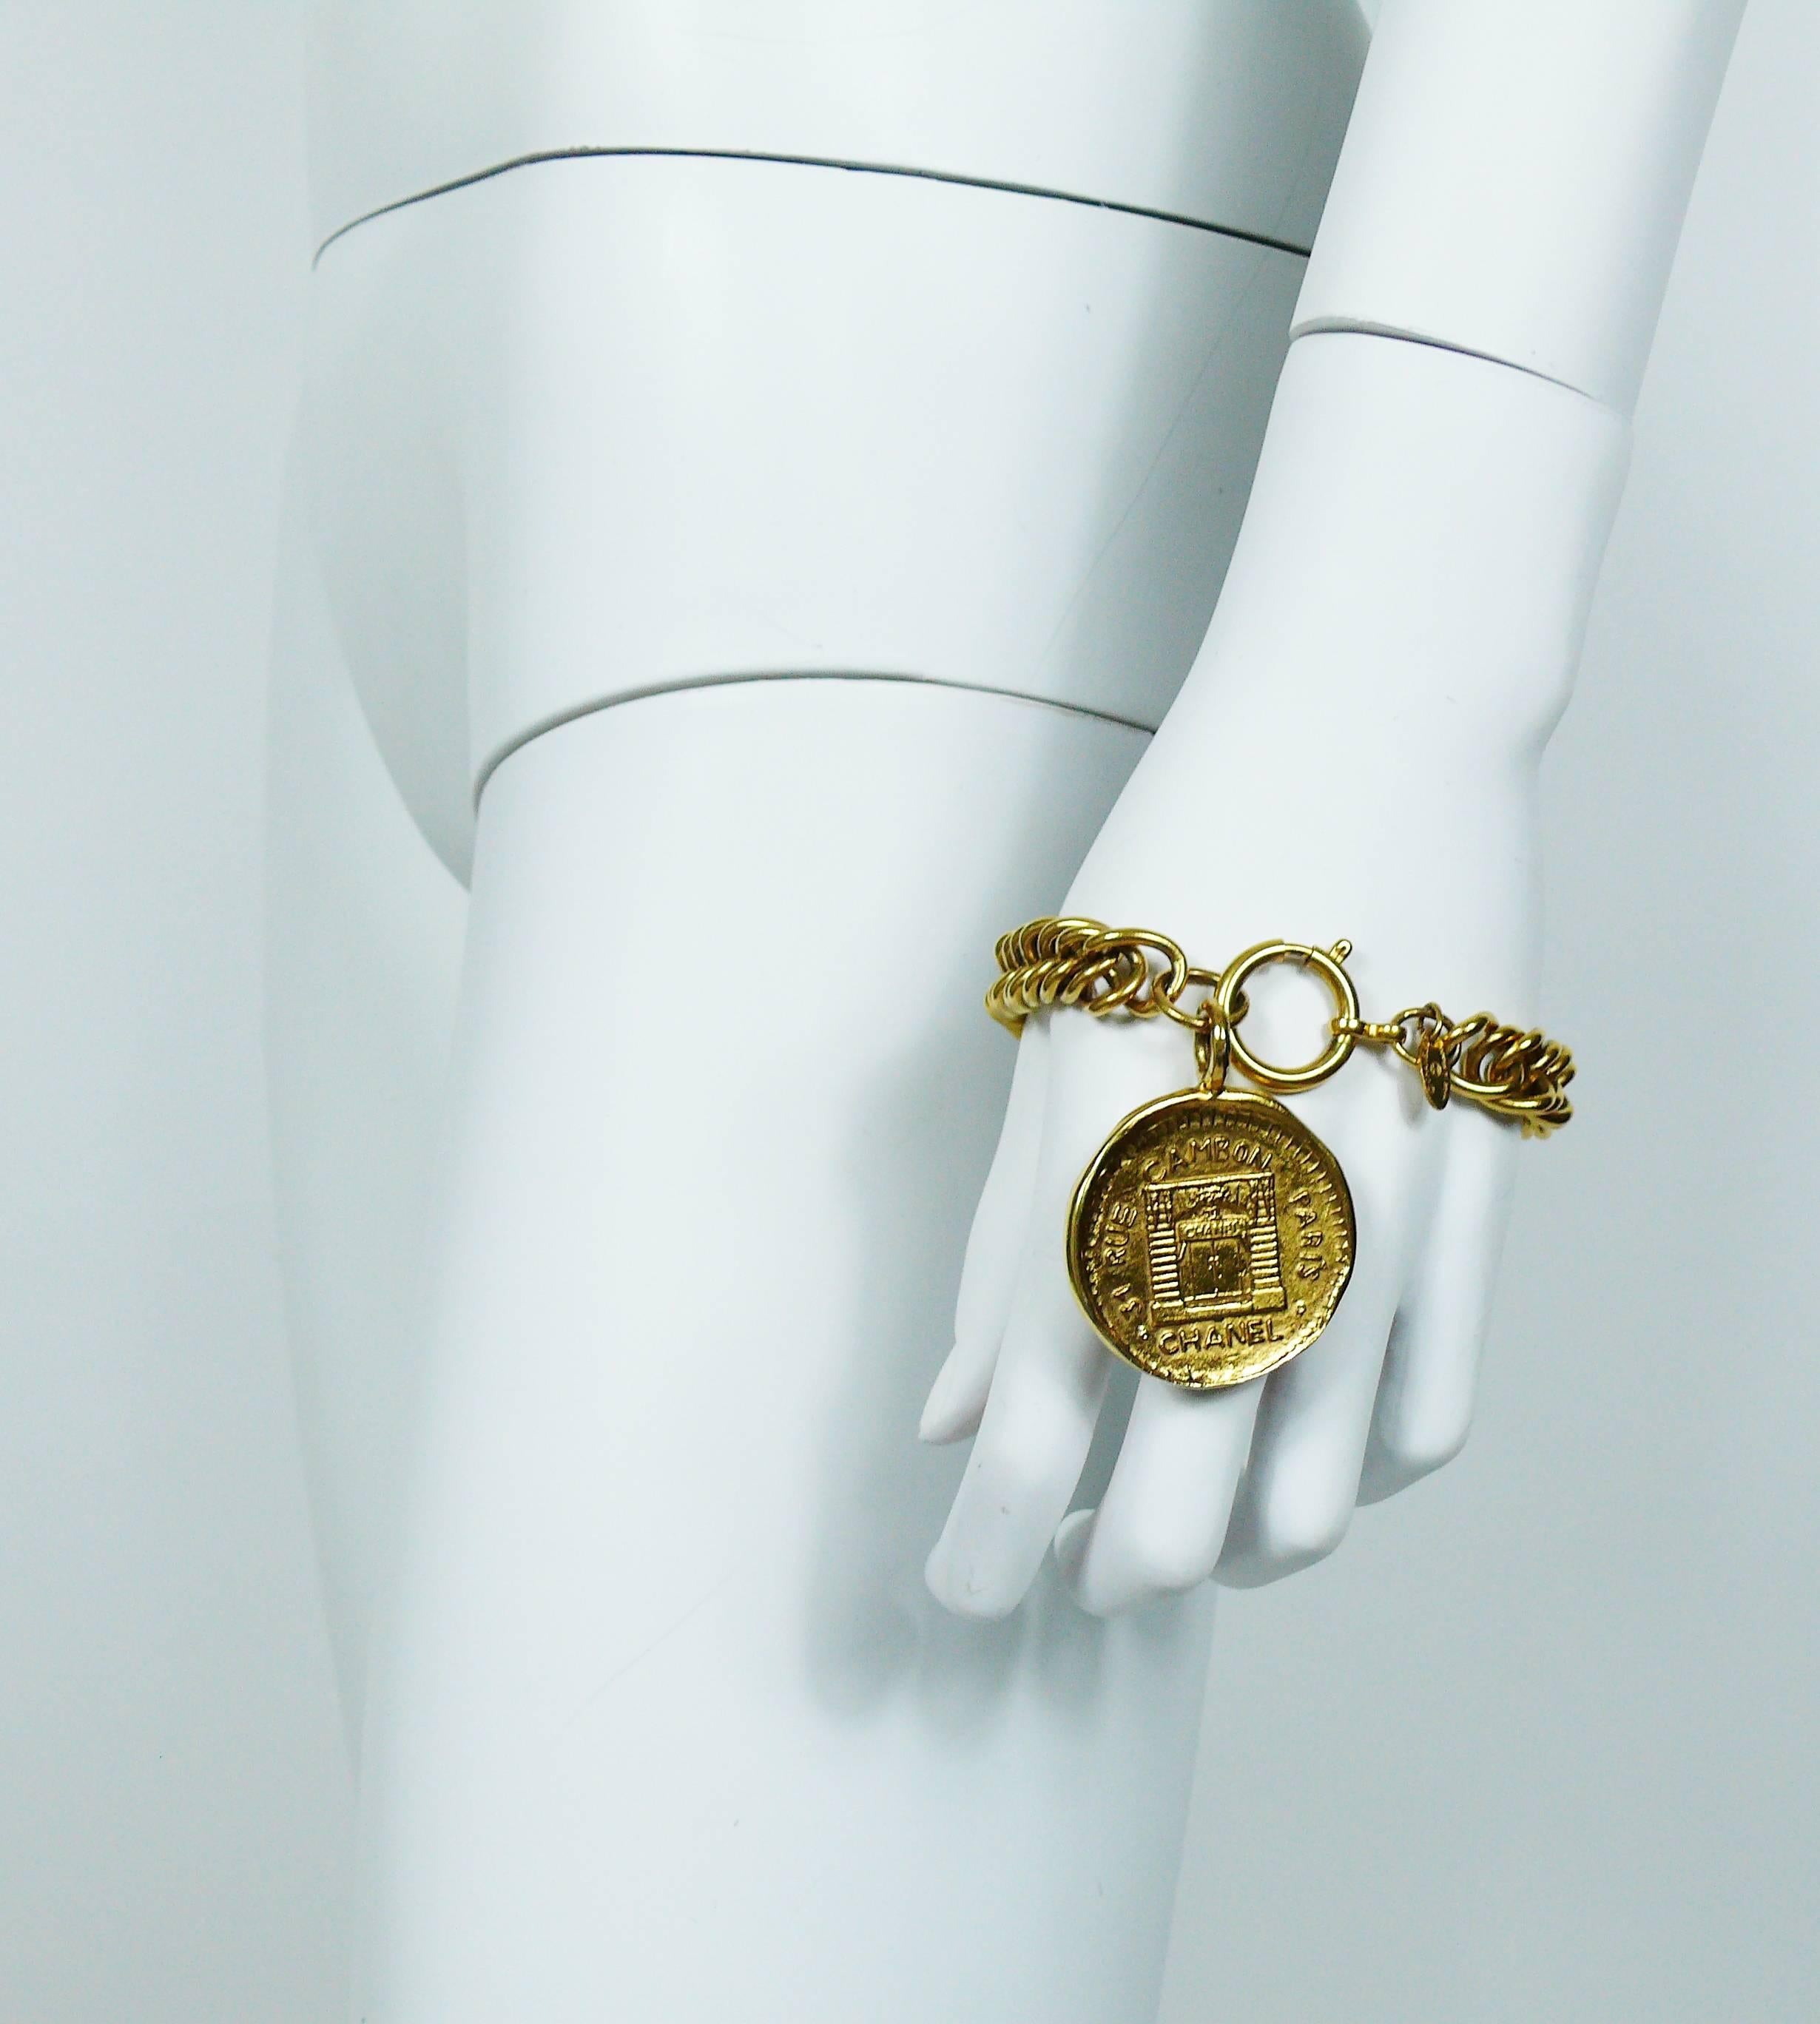 CHANEL vintage curb bracelet featuring a massive "31 Rue Cambon" coin charm.

Spring clasp.

Tag CHANEL Made in France.

Indicative measurements : total length approx. 22 cm (8.66 inches) / chain with approx. 1.1 cm (0.43 inch) / coin